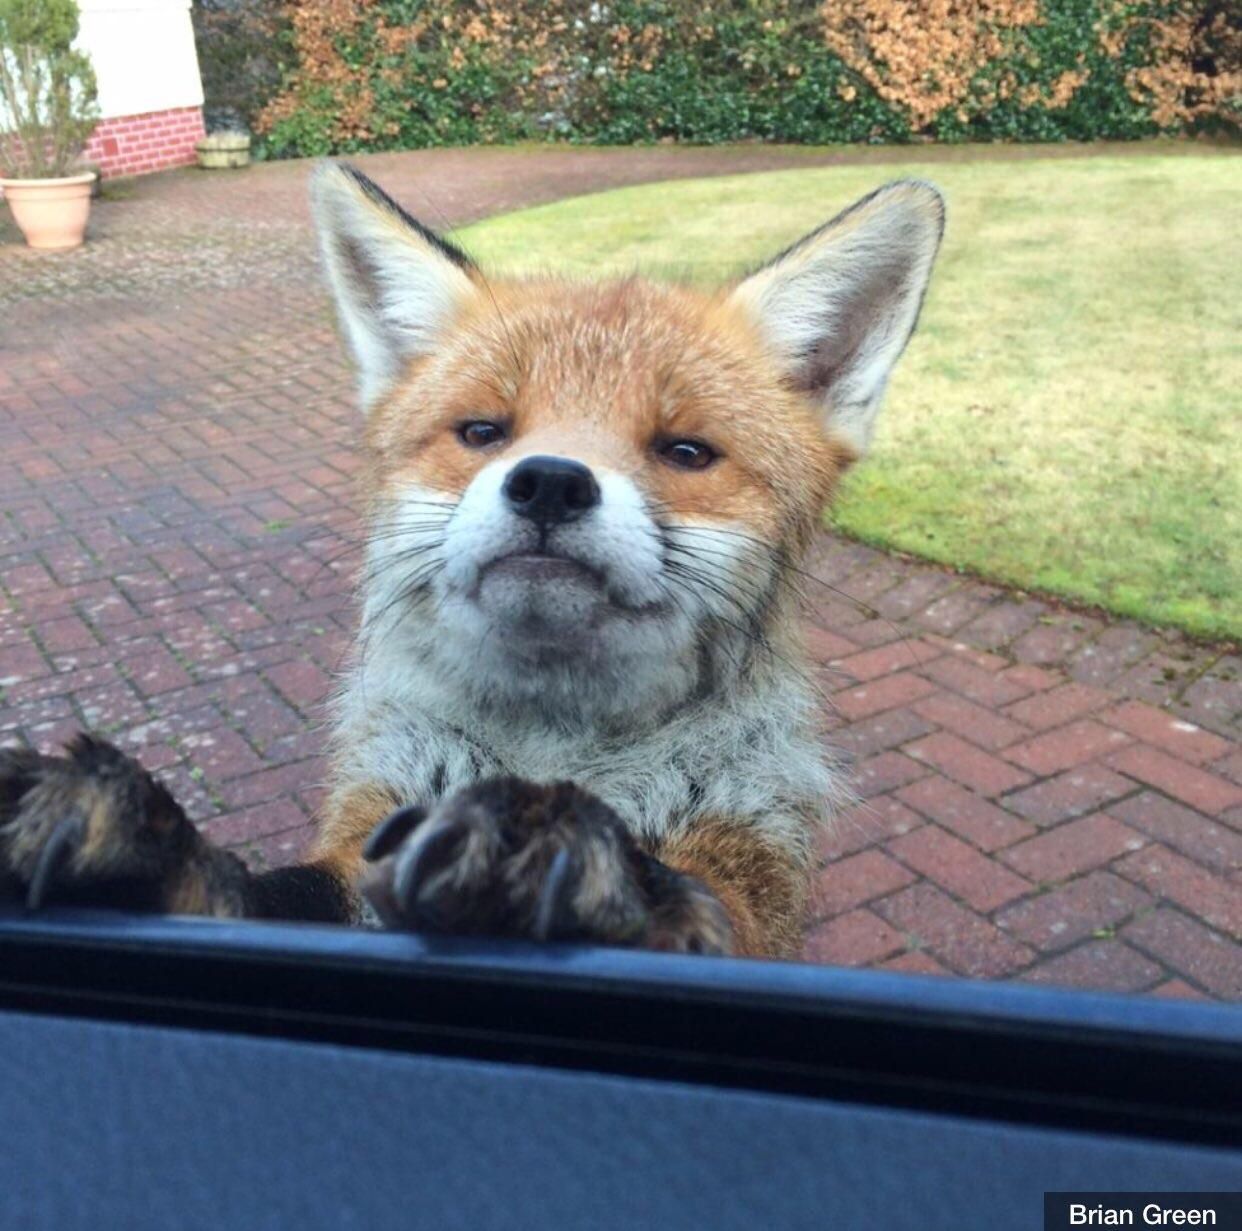 This fox has seen some shit